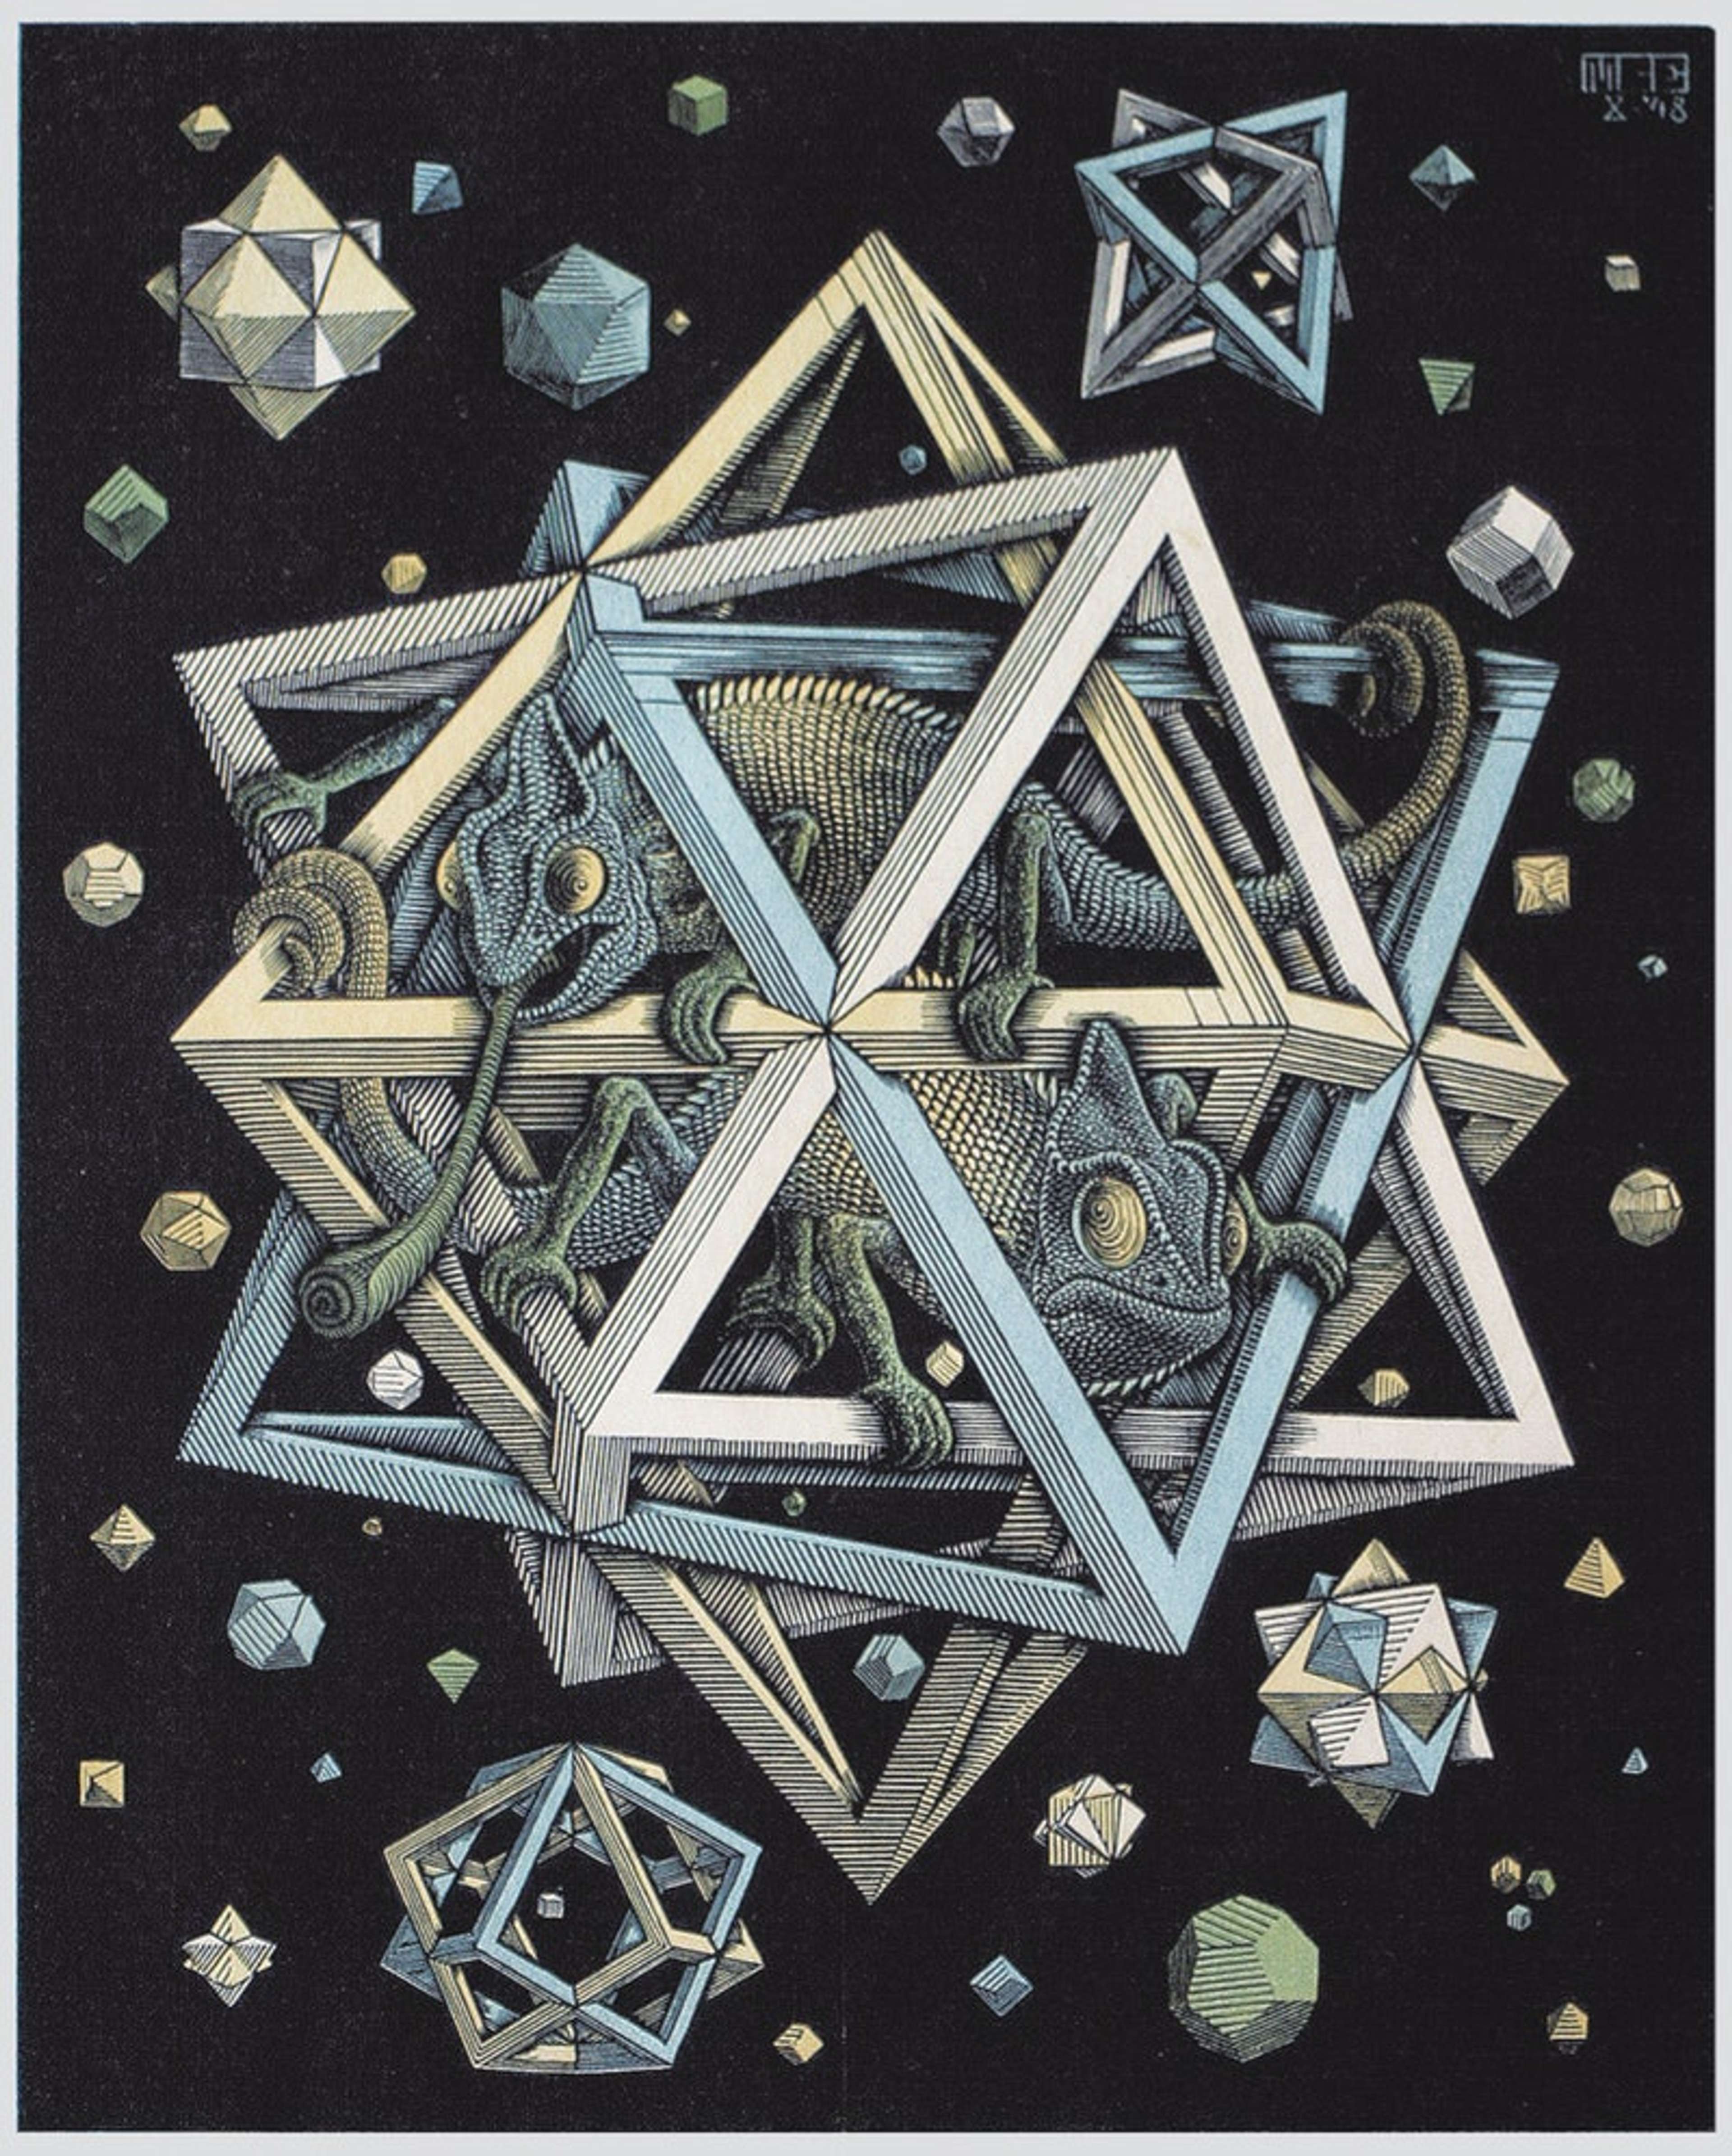 A black and white lithograph print titled "Stars" by M.C. Escher. The artwork features a repeating pattern of interlocking stars forming a geometric design, with two chameleons inside.